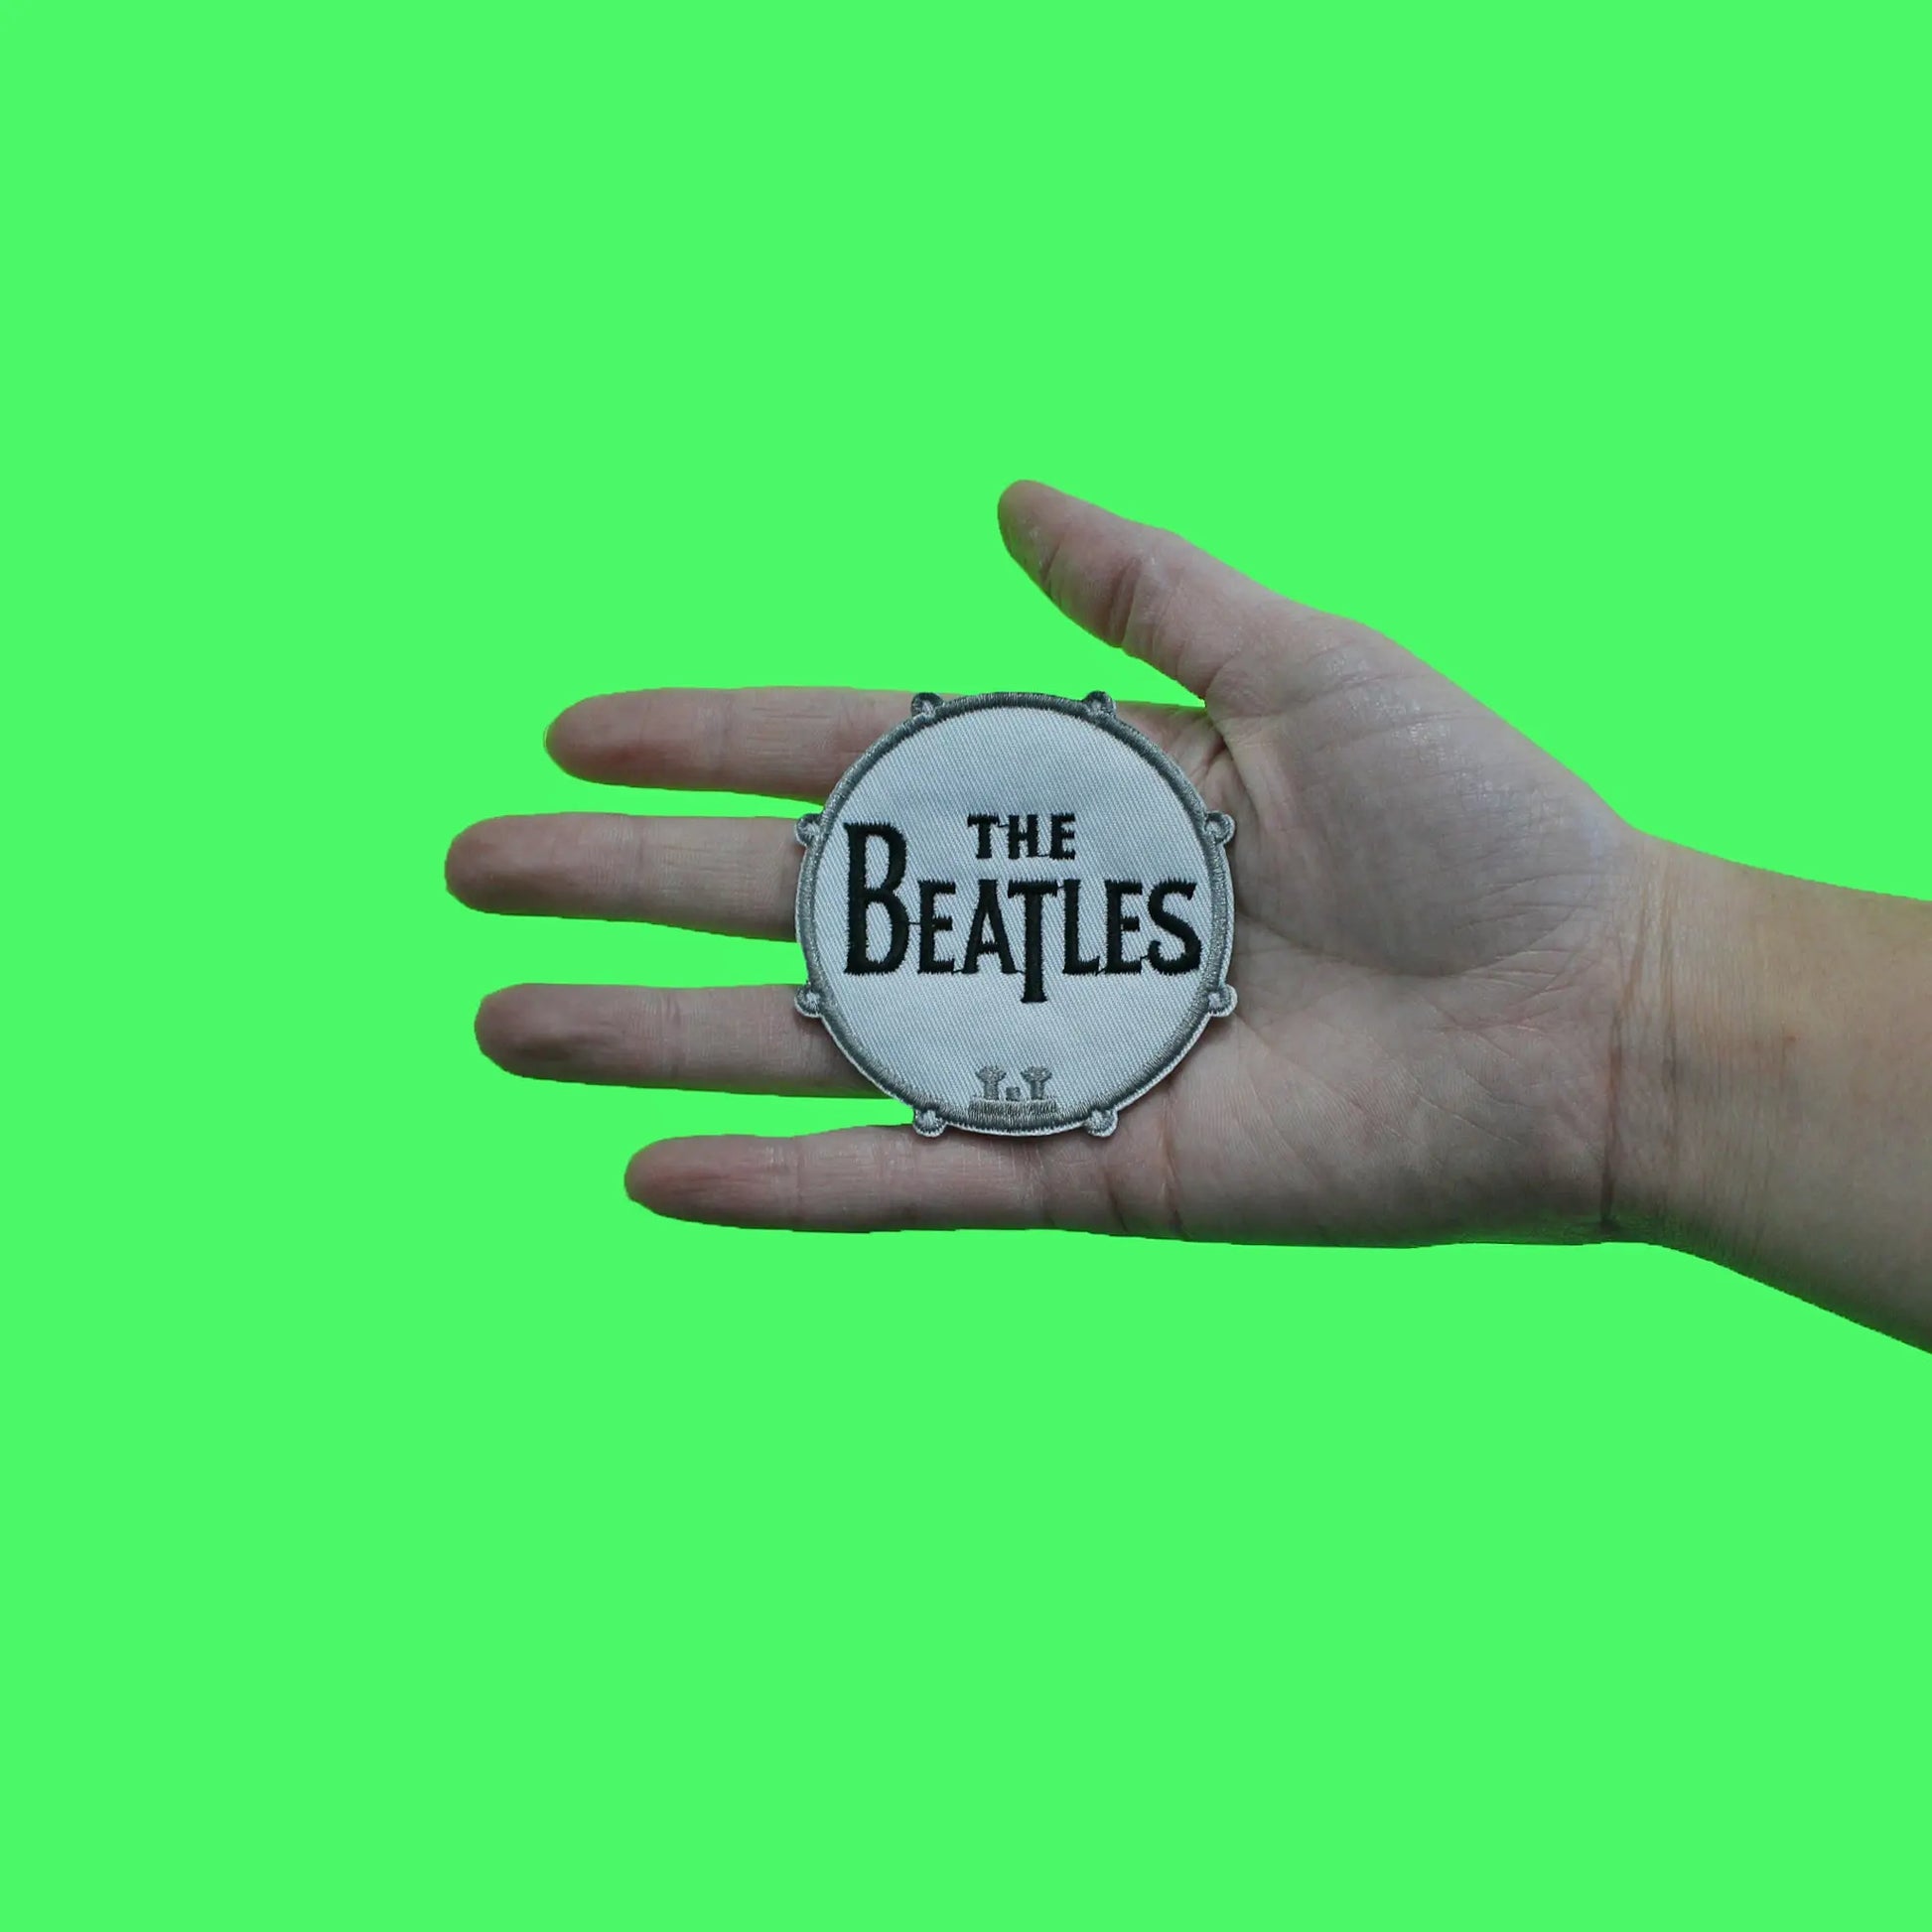 The Beatles Drum Logo Patch Iconic Rock Band Embroidered Iron On